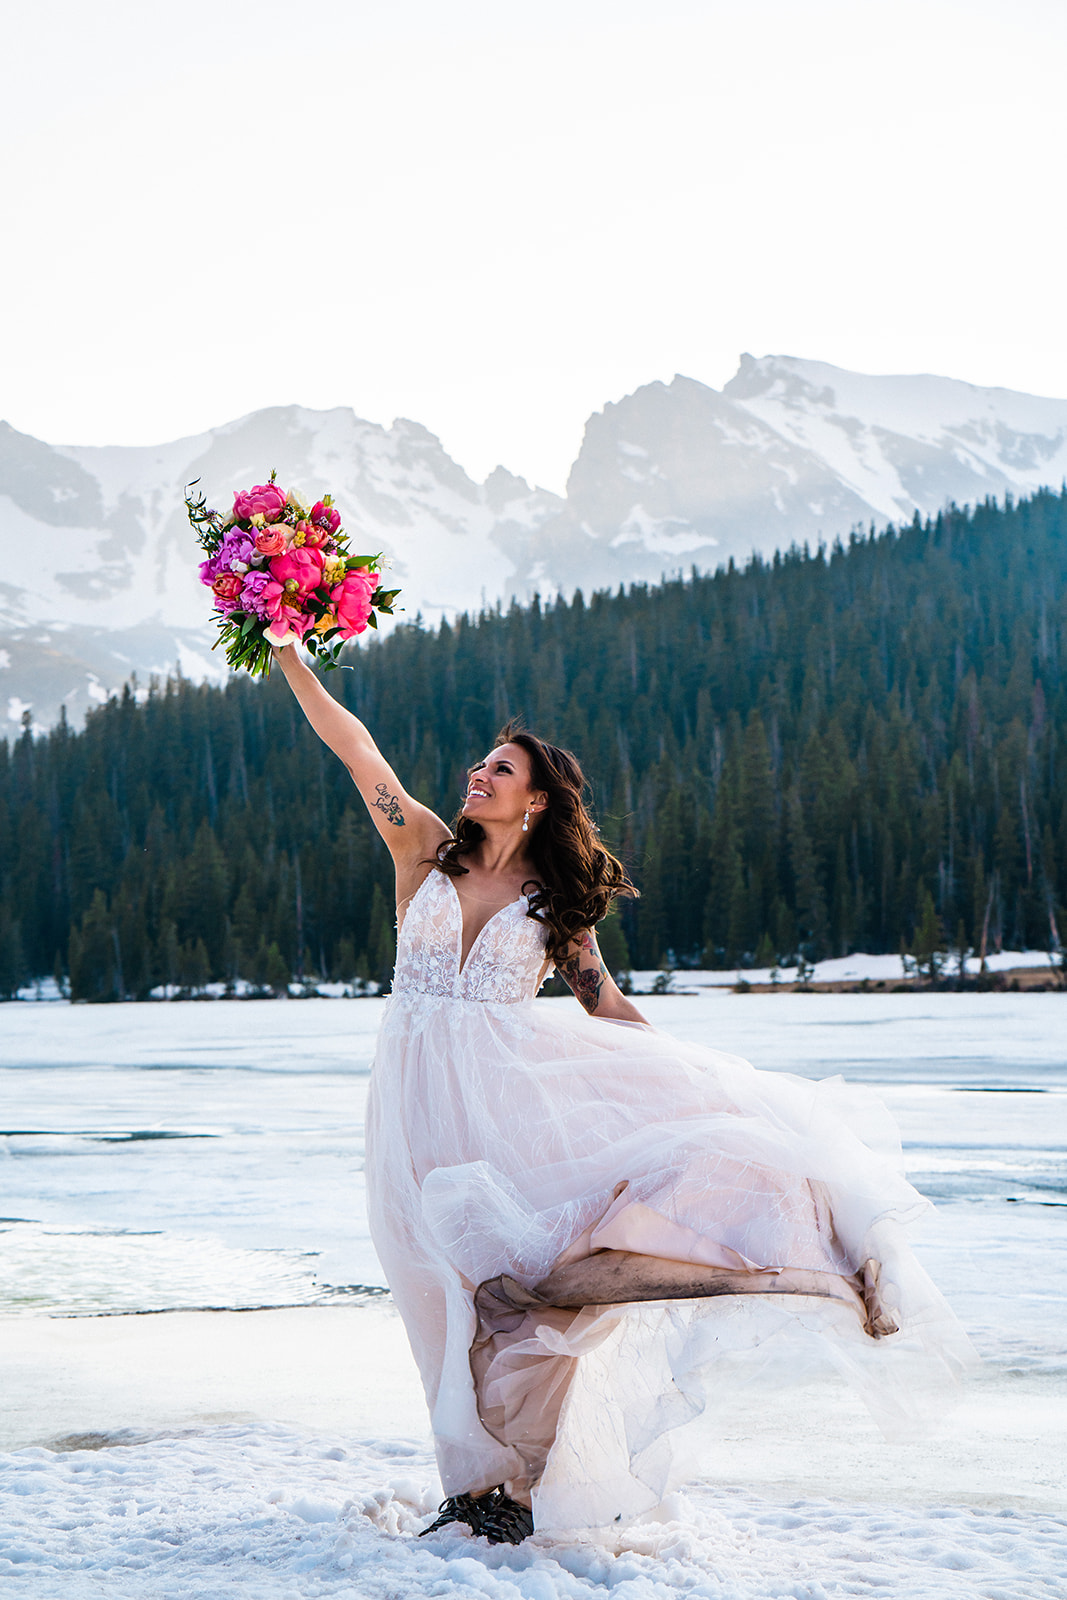 A bride in an elopement dress is holding flowers in the snow.